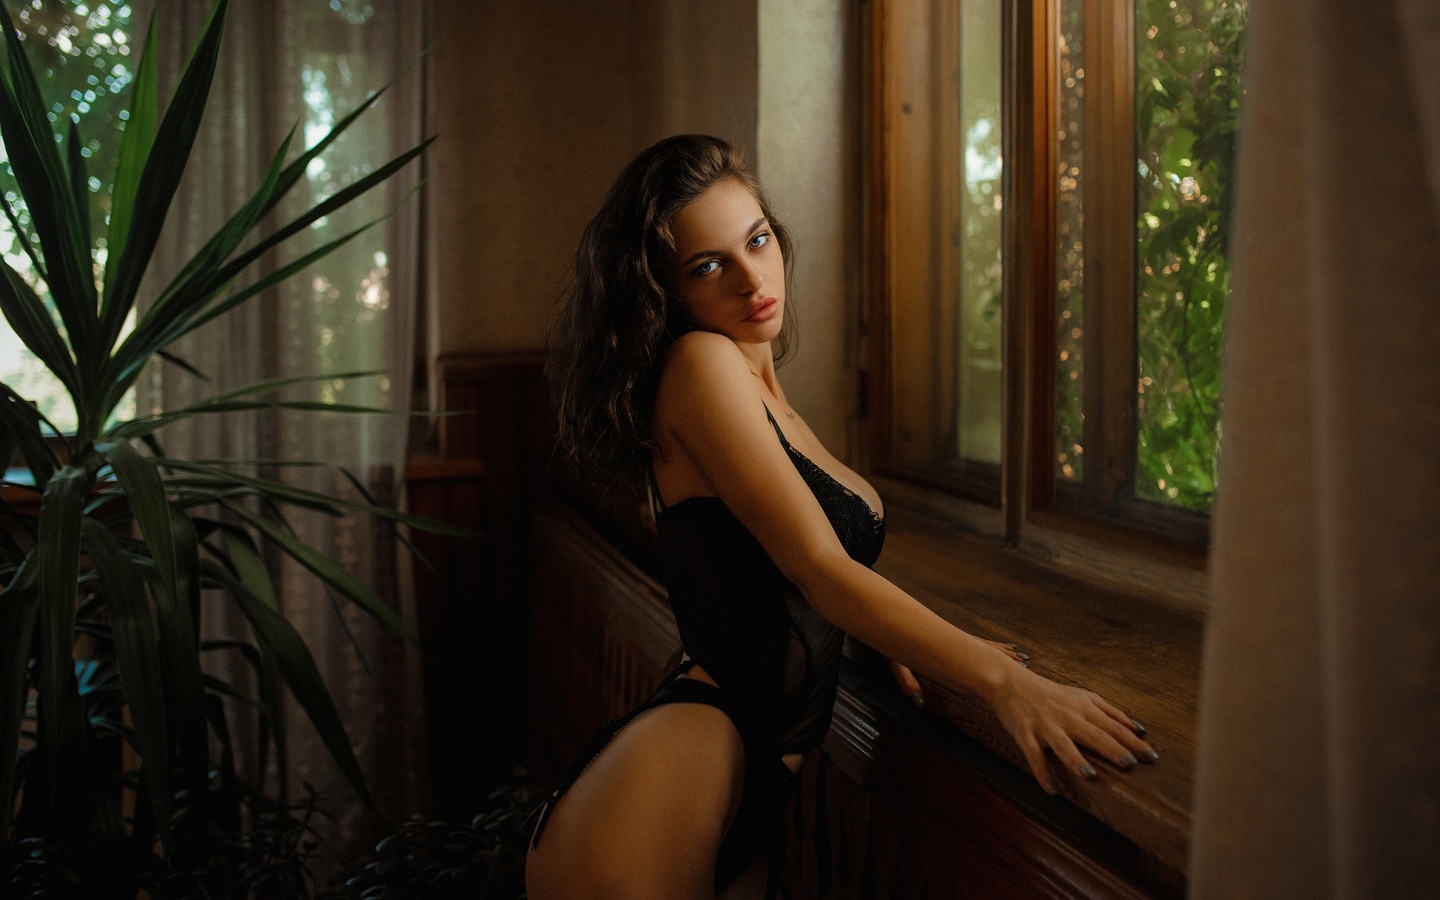 by the window, cleavage, , brunette, women indoors, black lingerie, model, black panties, ass, plants, tattoo, gray nails, window